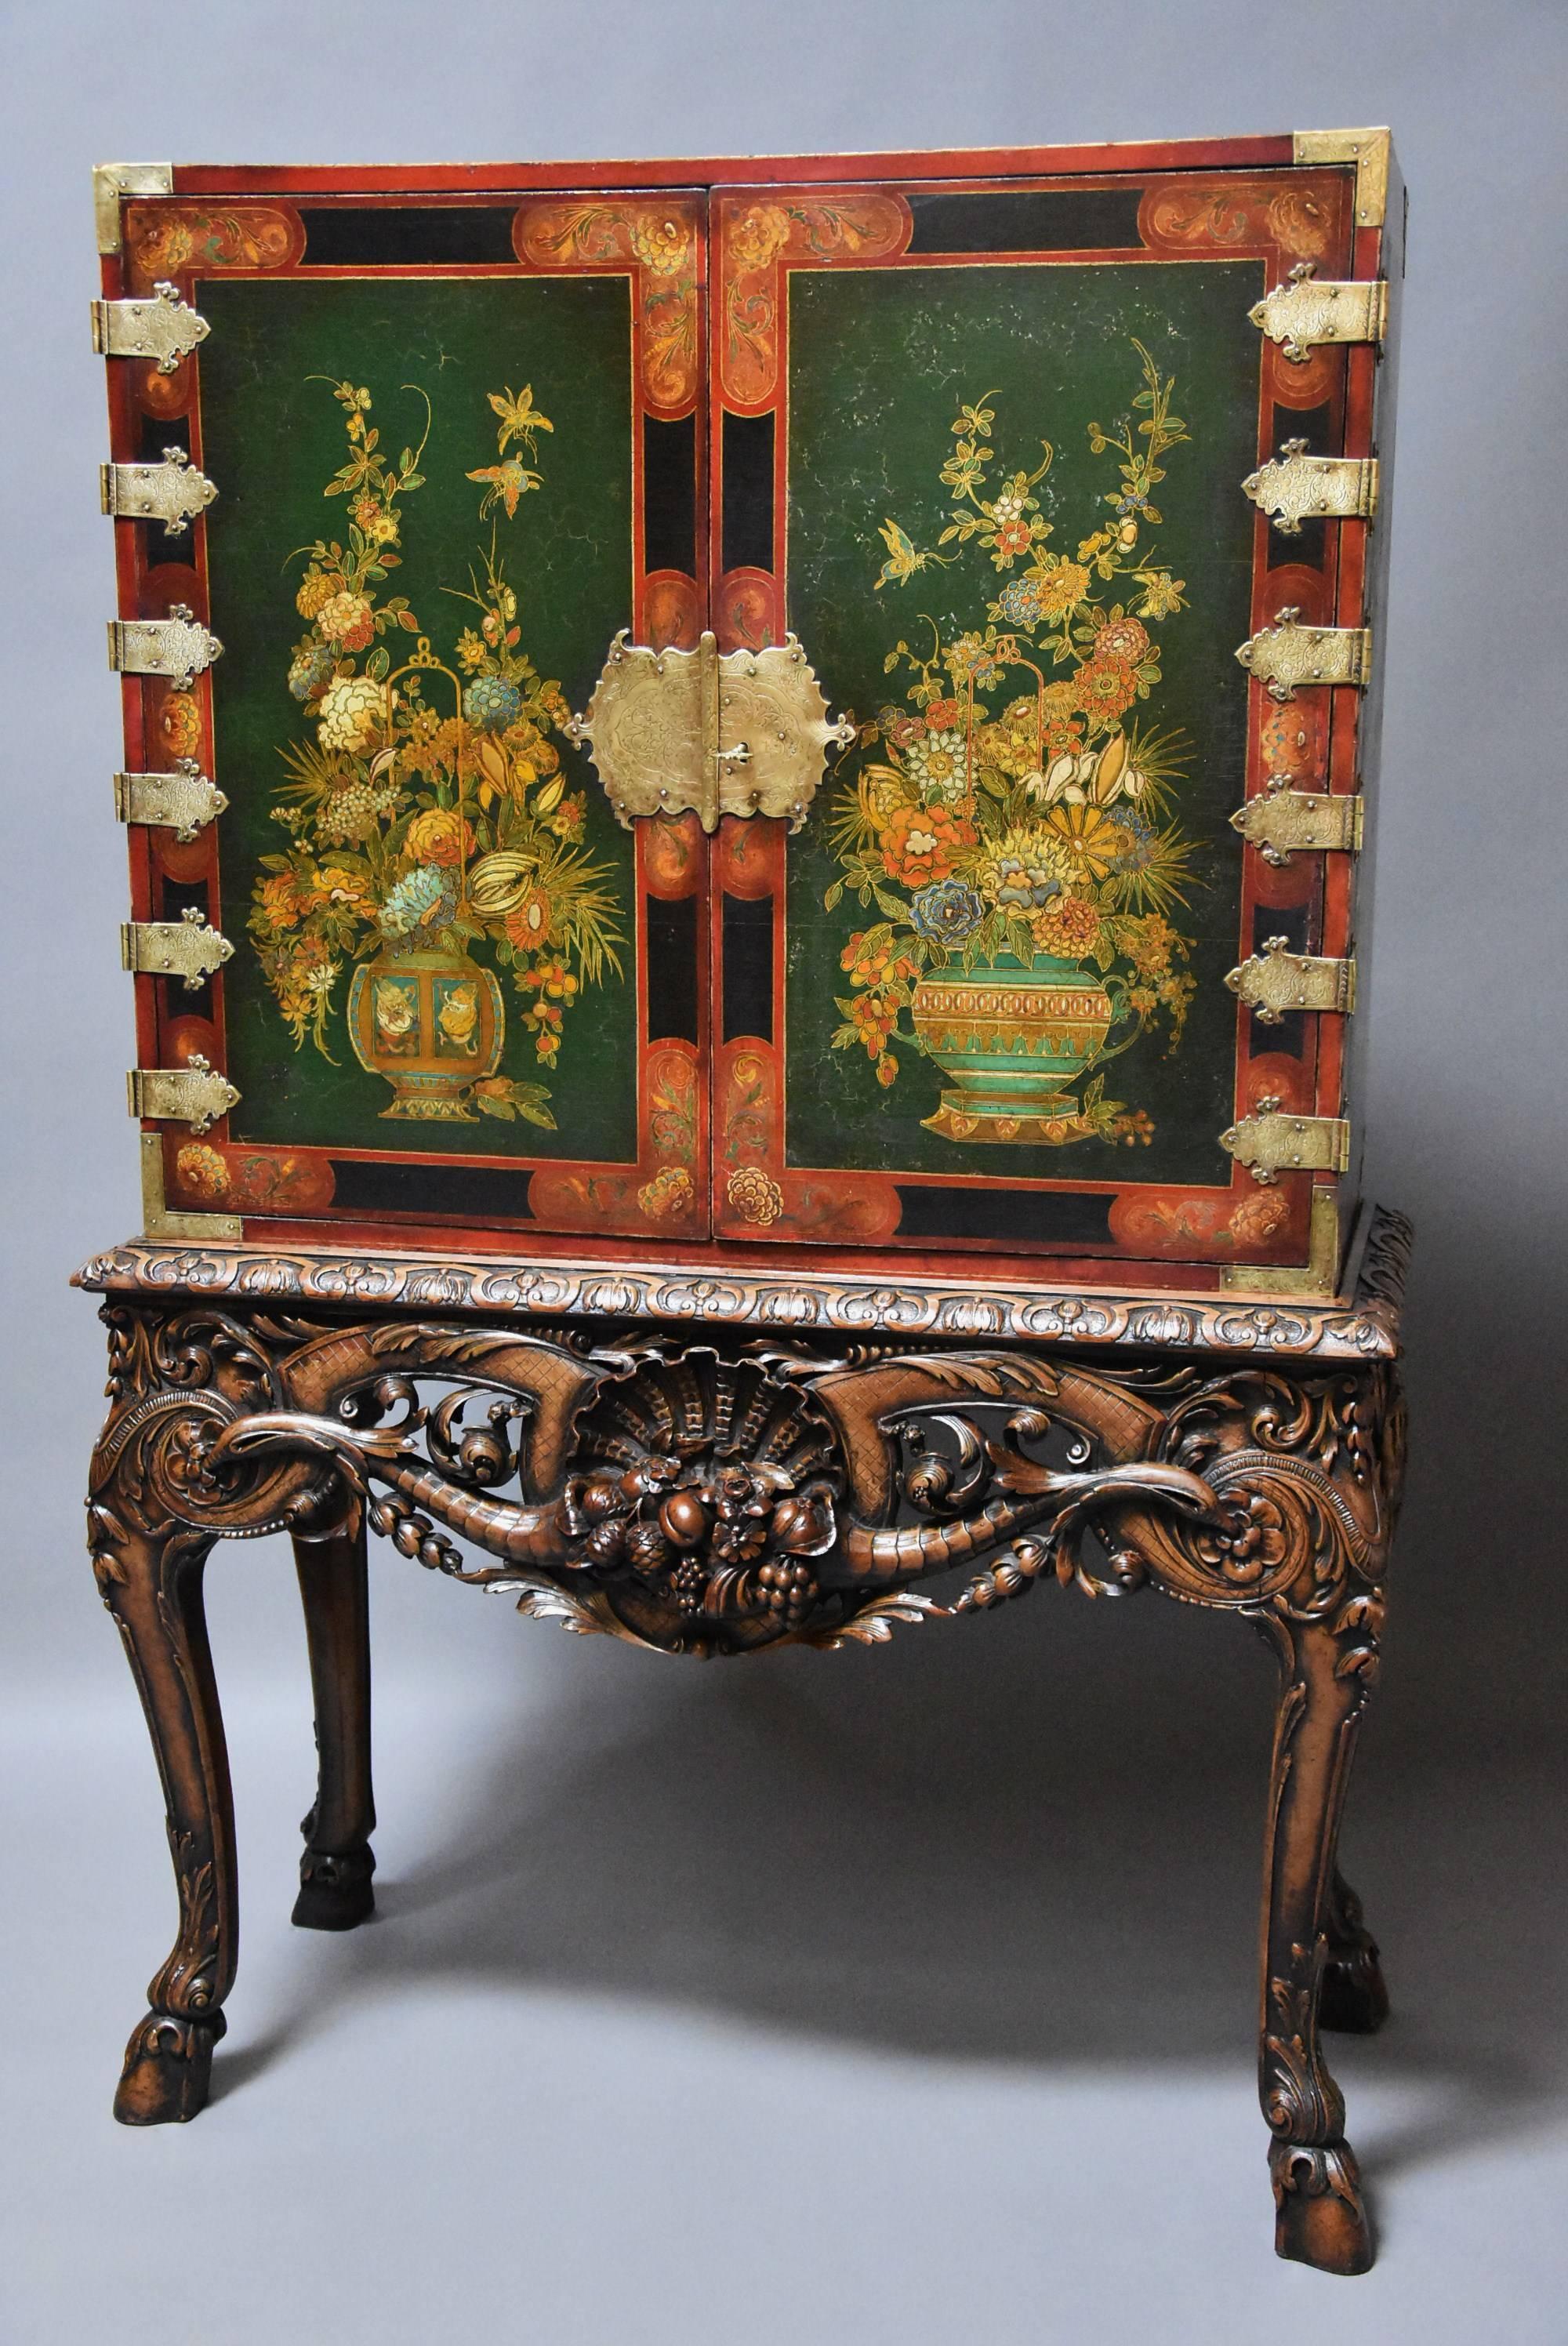 A superb quality English early 20th century highly decorative George II style lacquered drinks/cocktail cabinet on stand. 

This cabinet on stand consists of a highly decorative two door cabinet superbly decorated with painted and lacquered floral